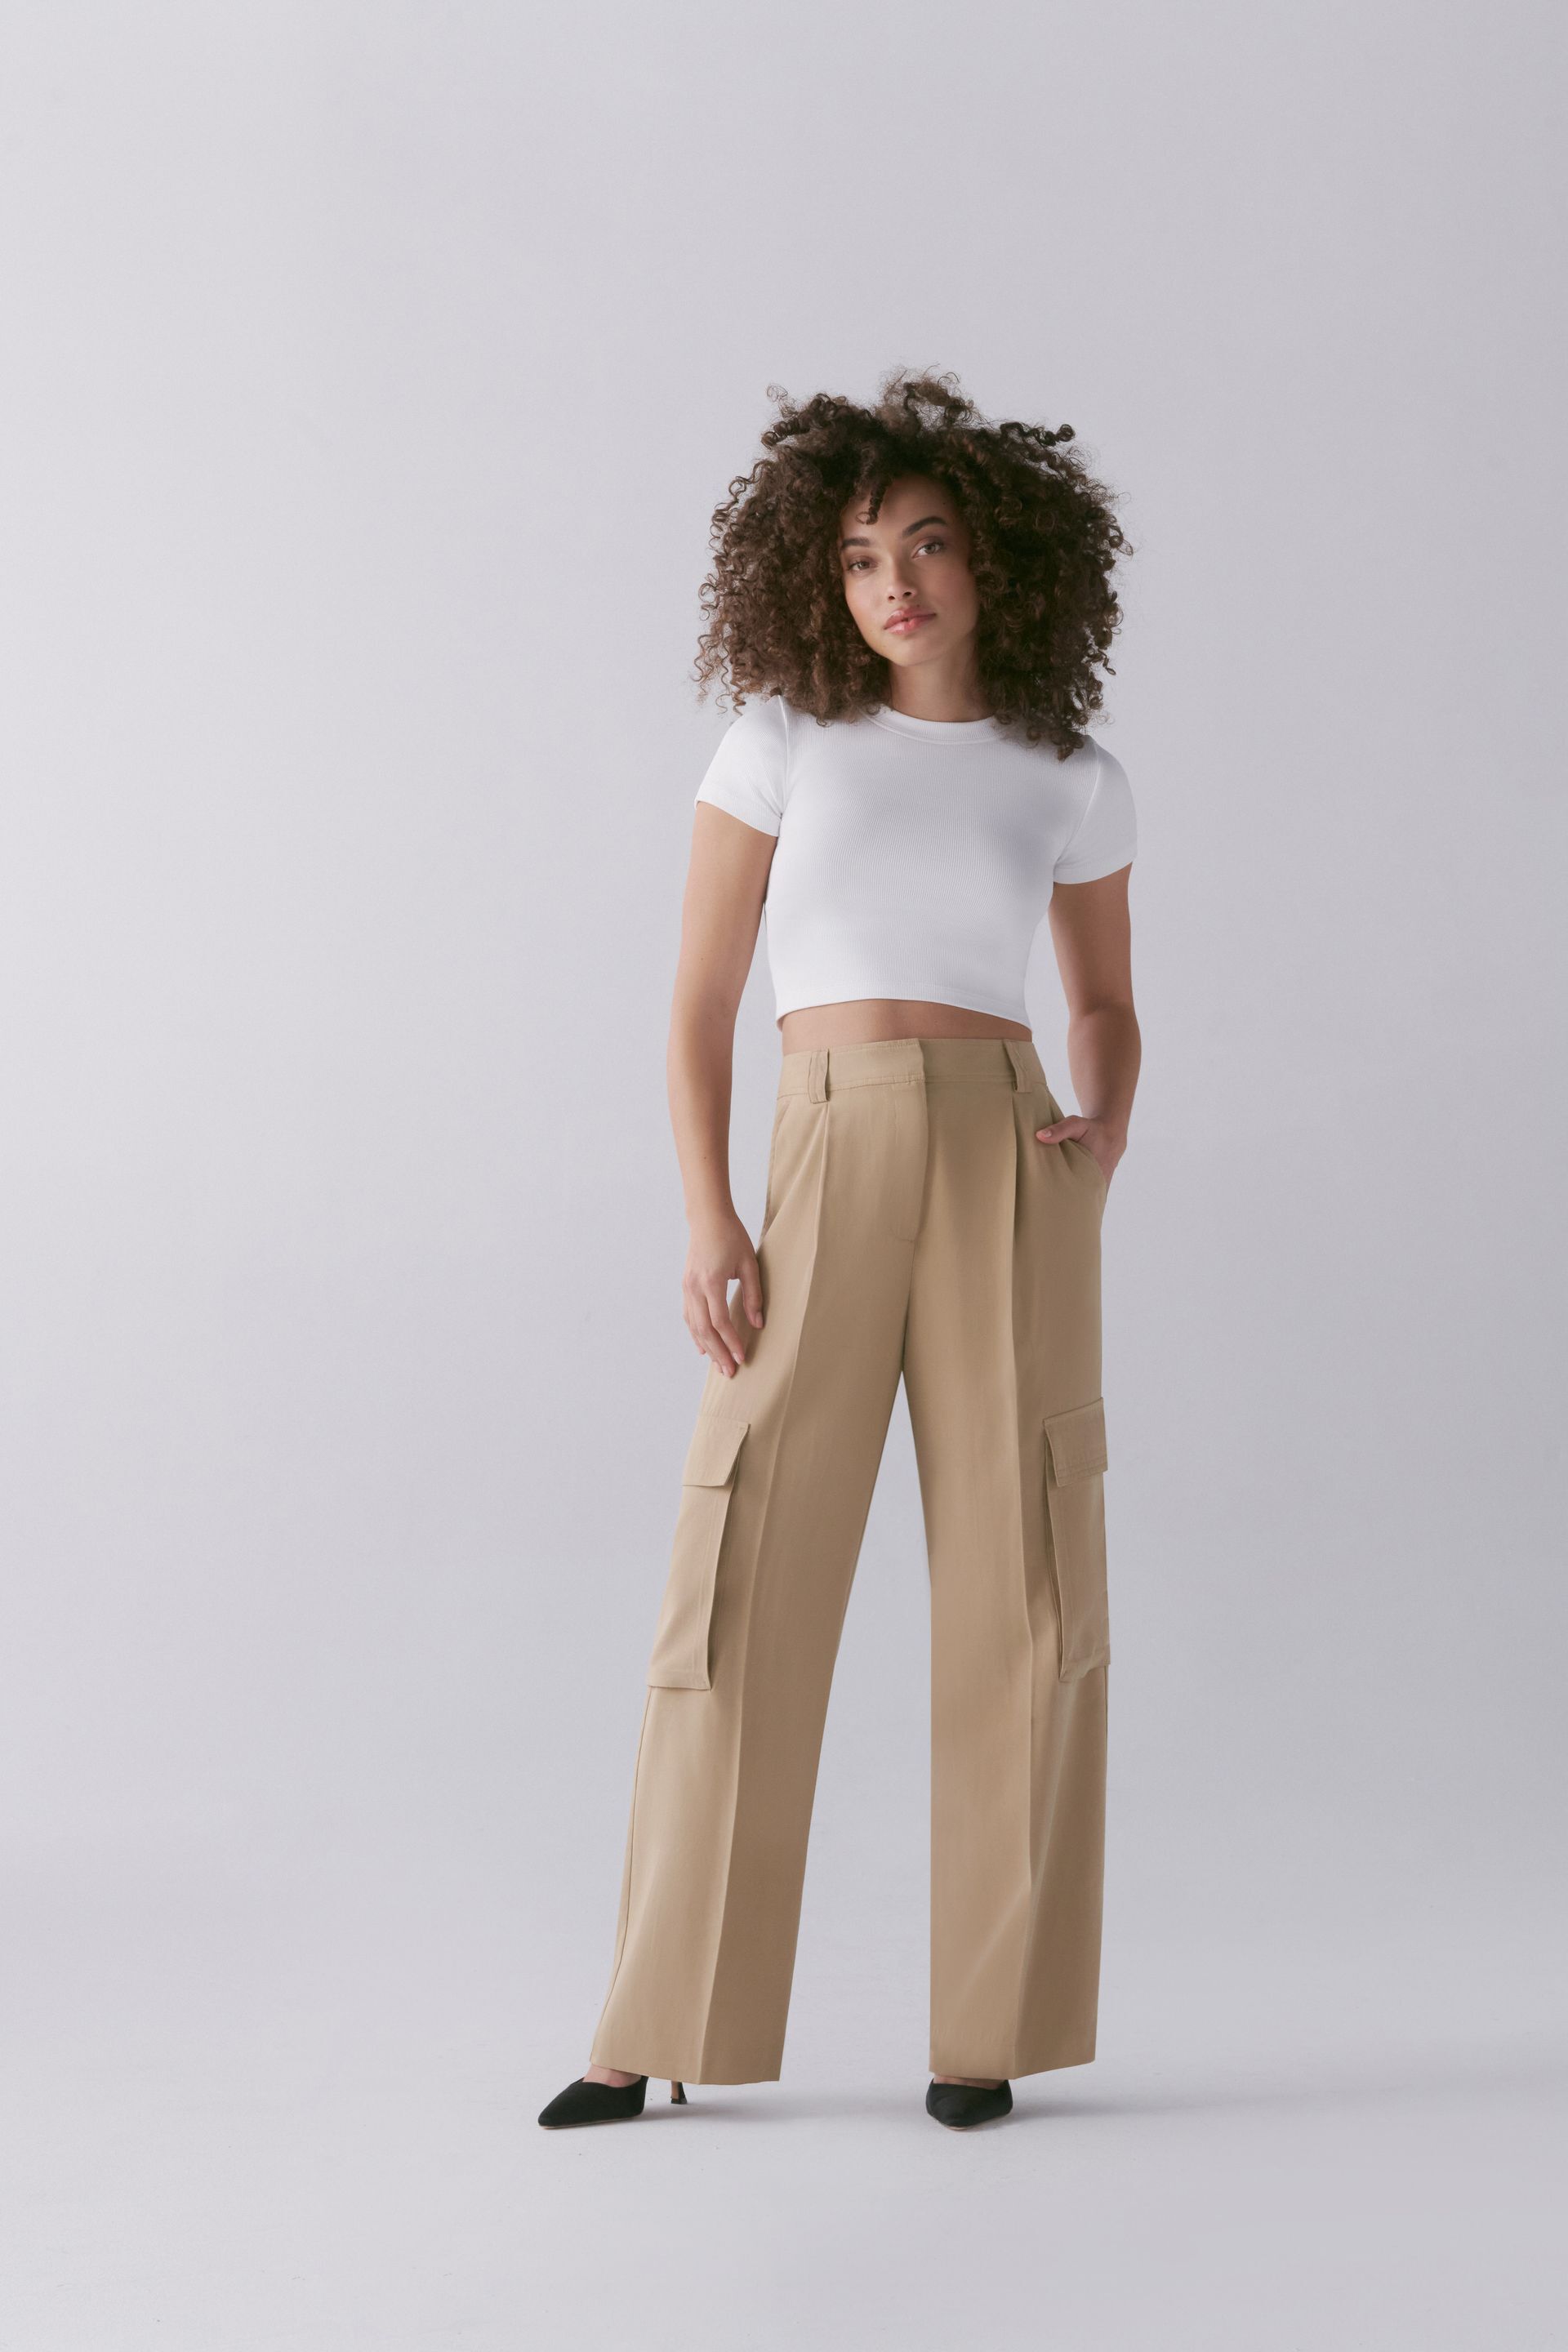 Urban Threads Cargo Trousers & Pants for Women sale - discounted price |  FASHIOLA INDIA